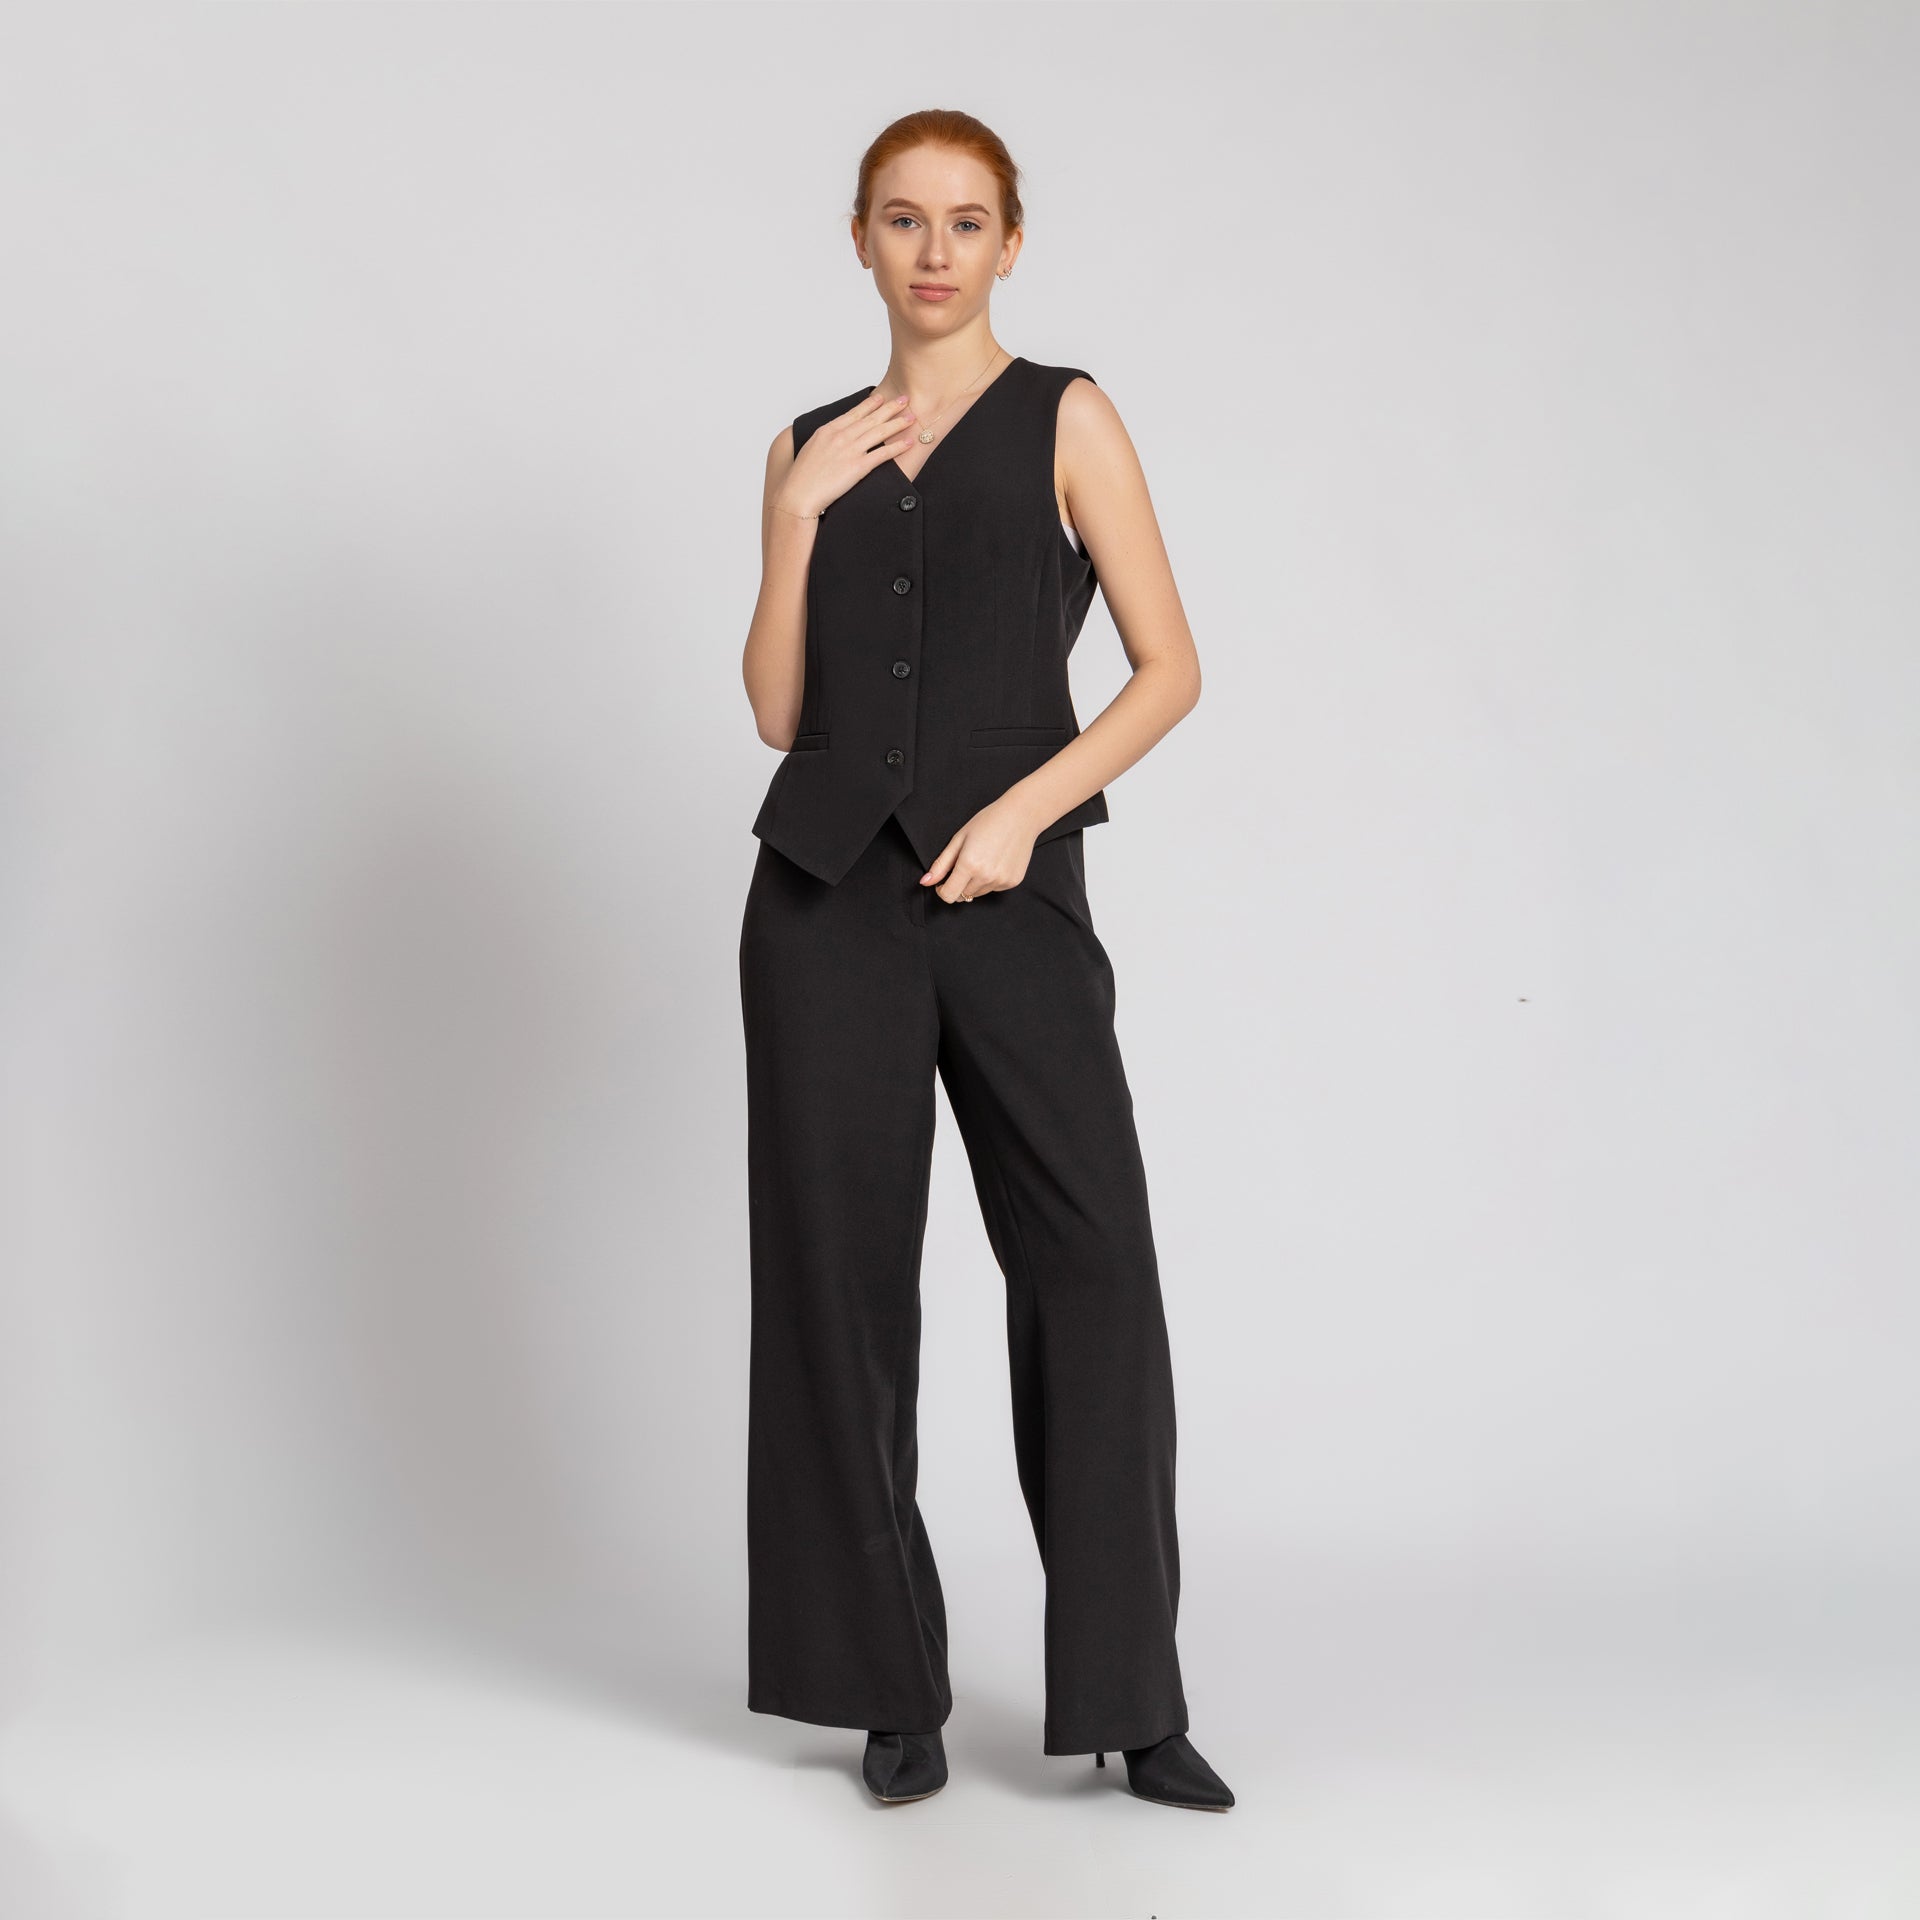 Black Straight-Cut Formal Crepe Trousers From Elanove